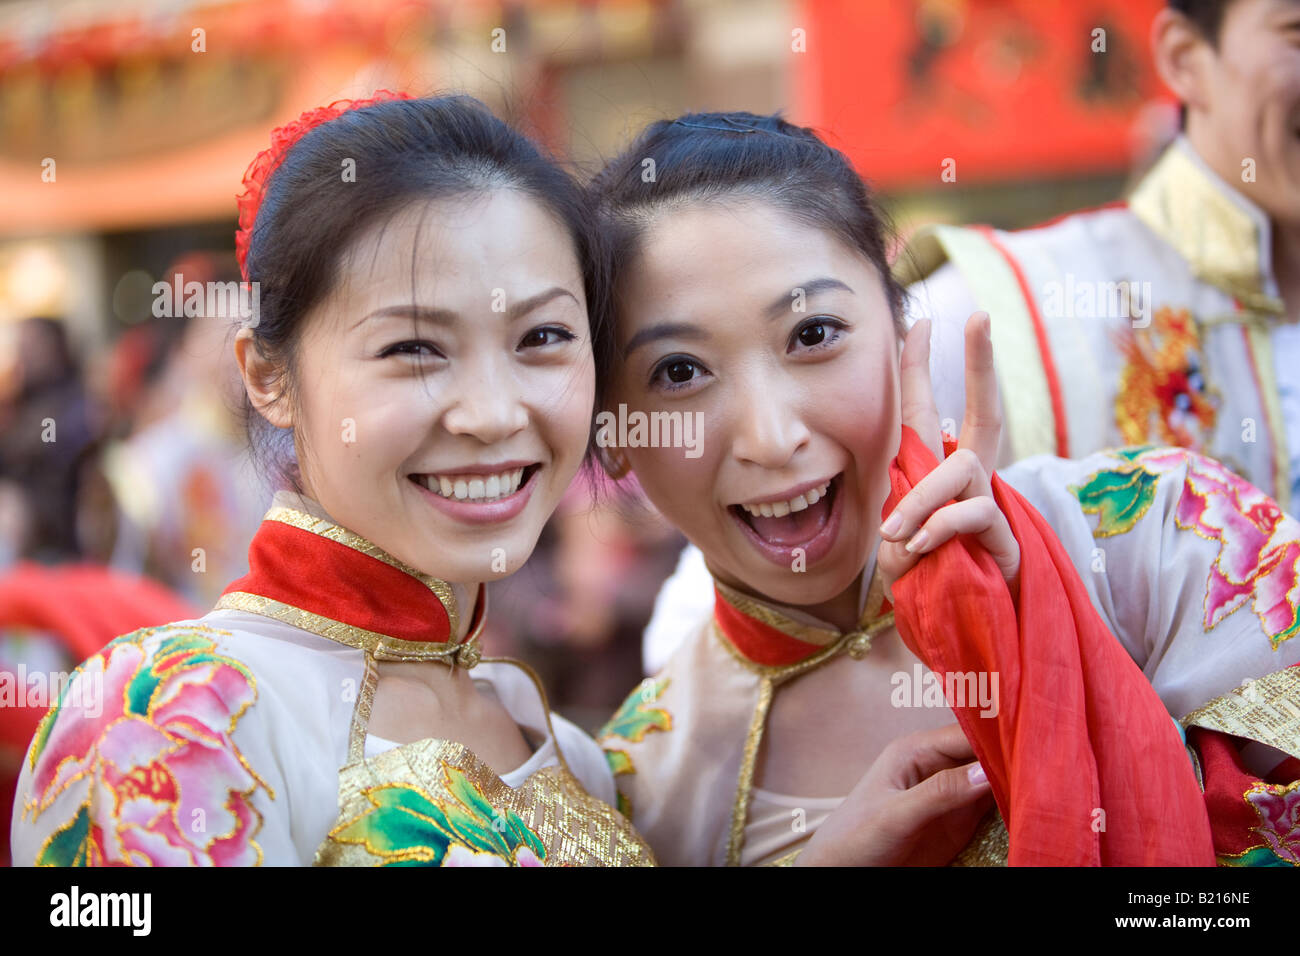 Two performers from the Chinese New Year parade in London. Stock Photo